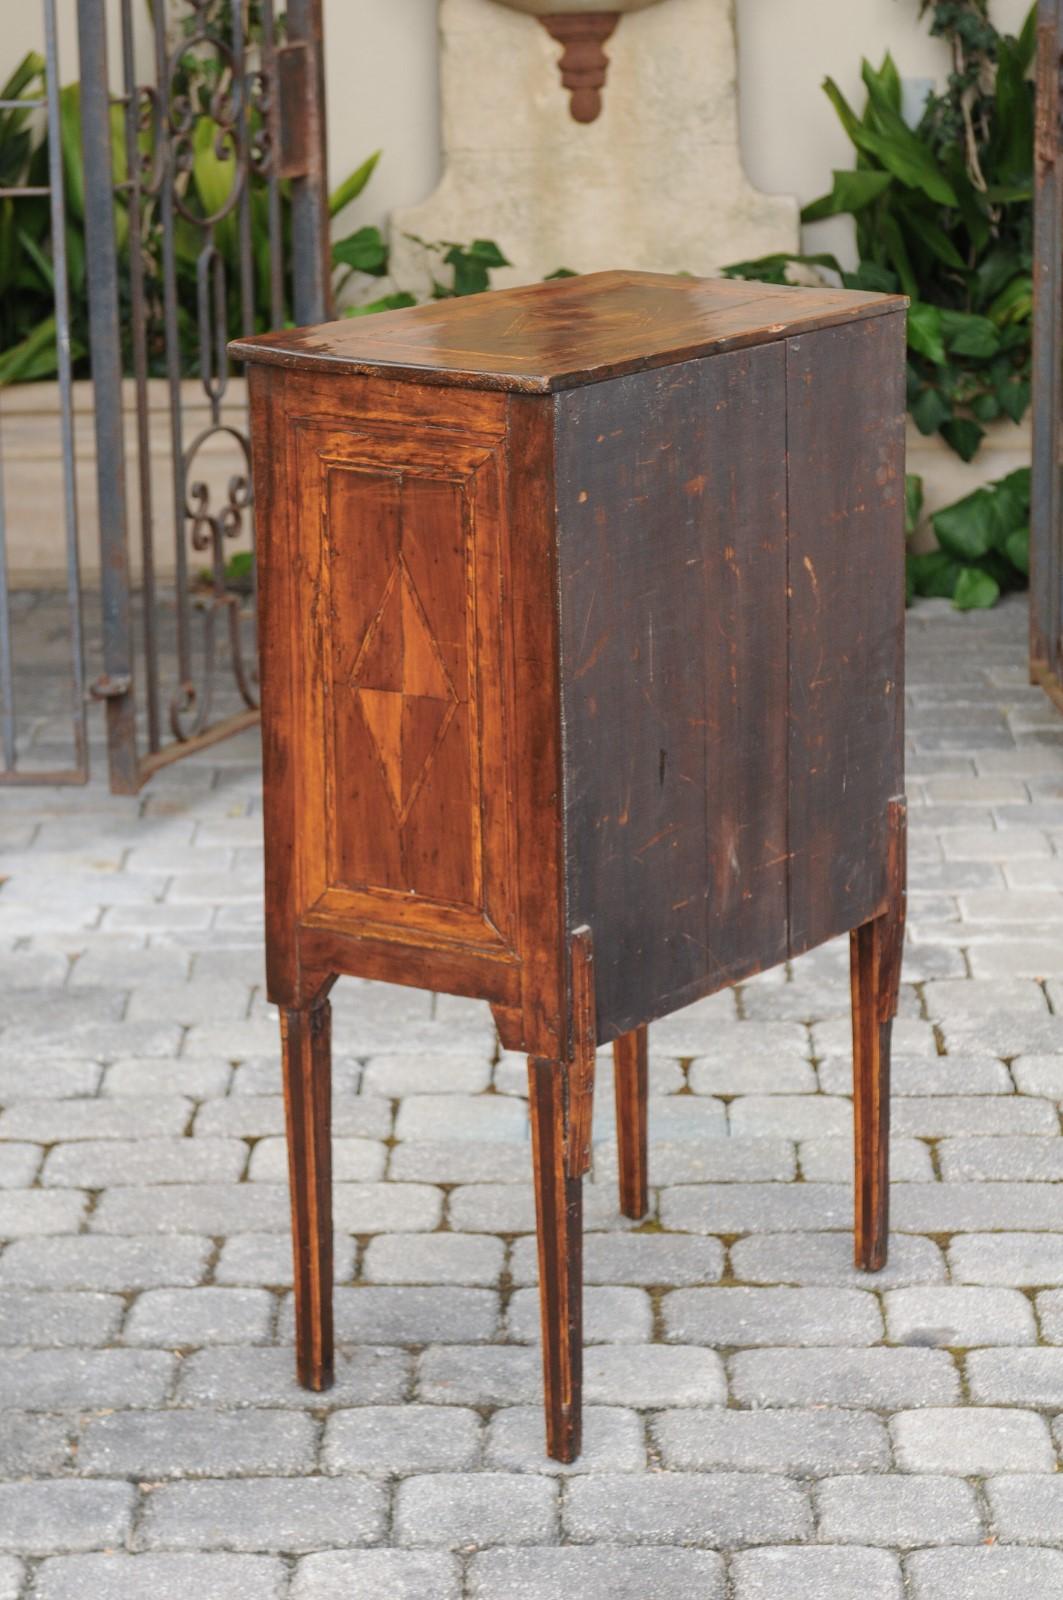 Petite Italian Neoclassical Period Walnut Commode circa 1800 with Inlaid Décor For Sale 3